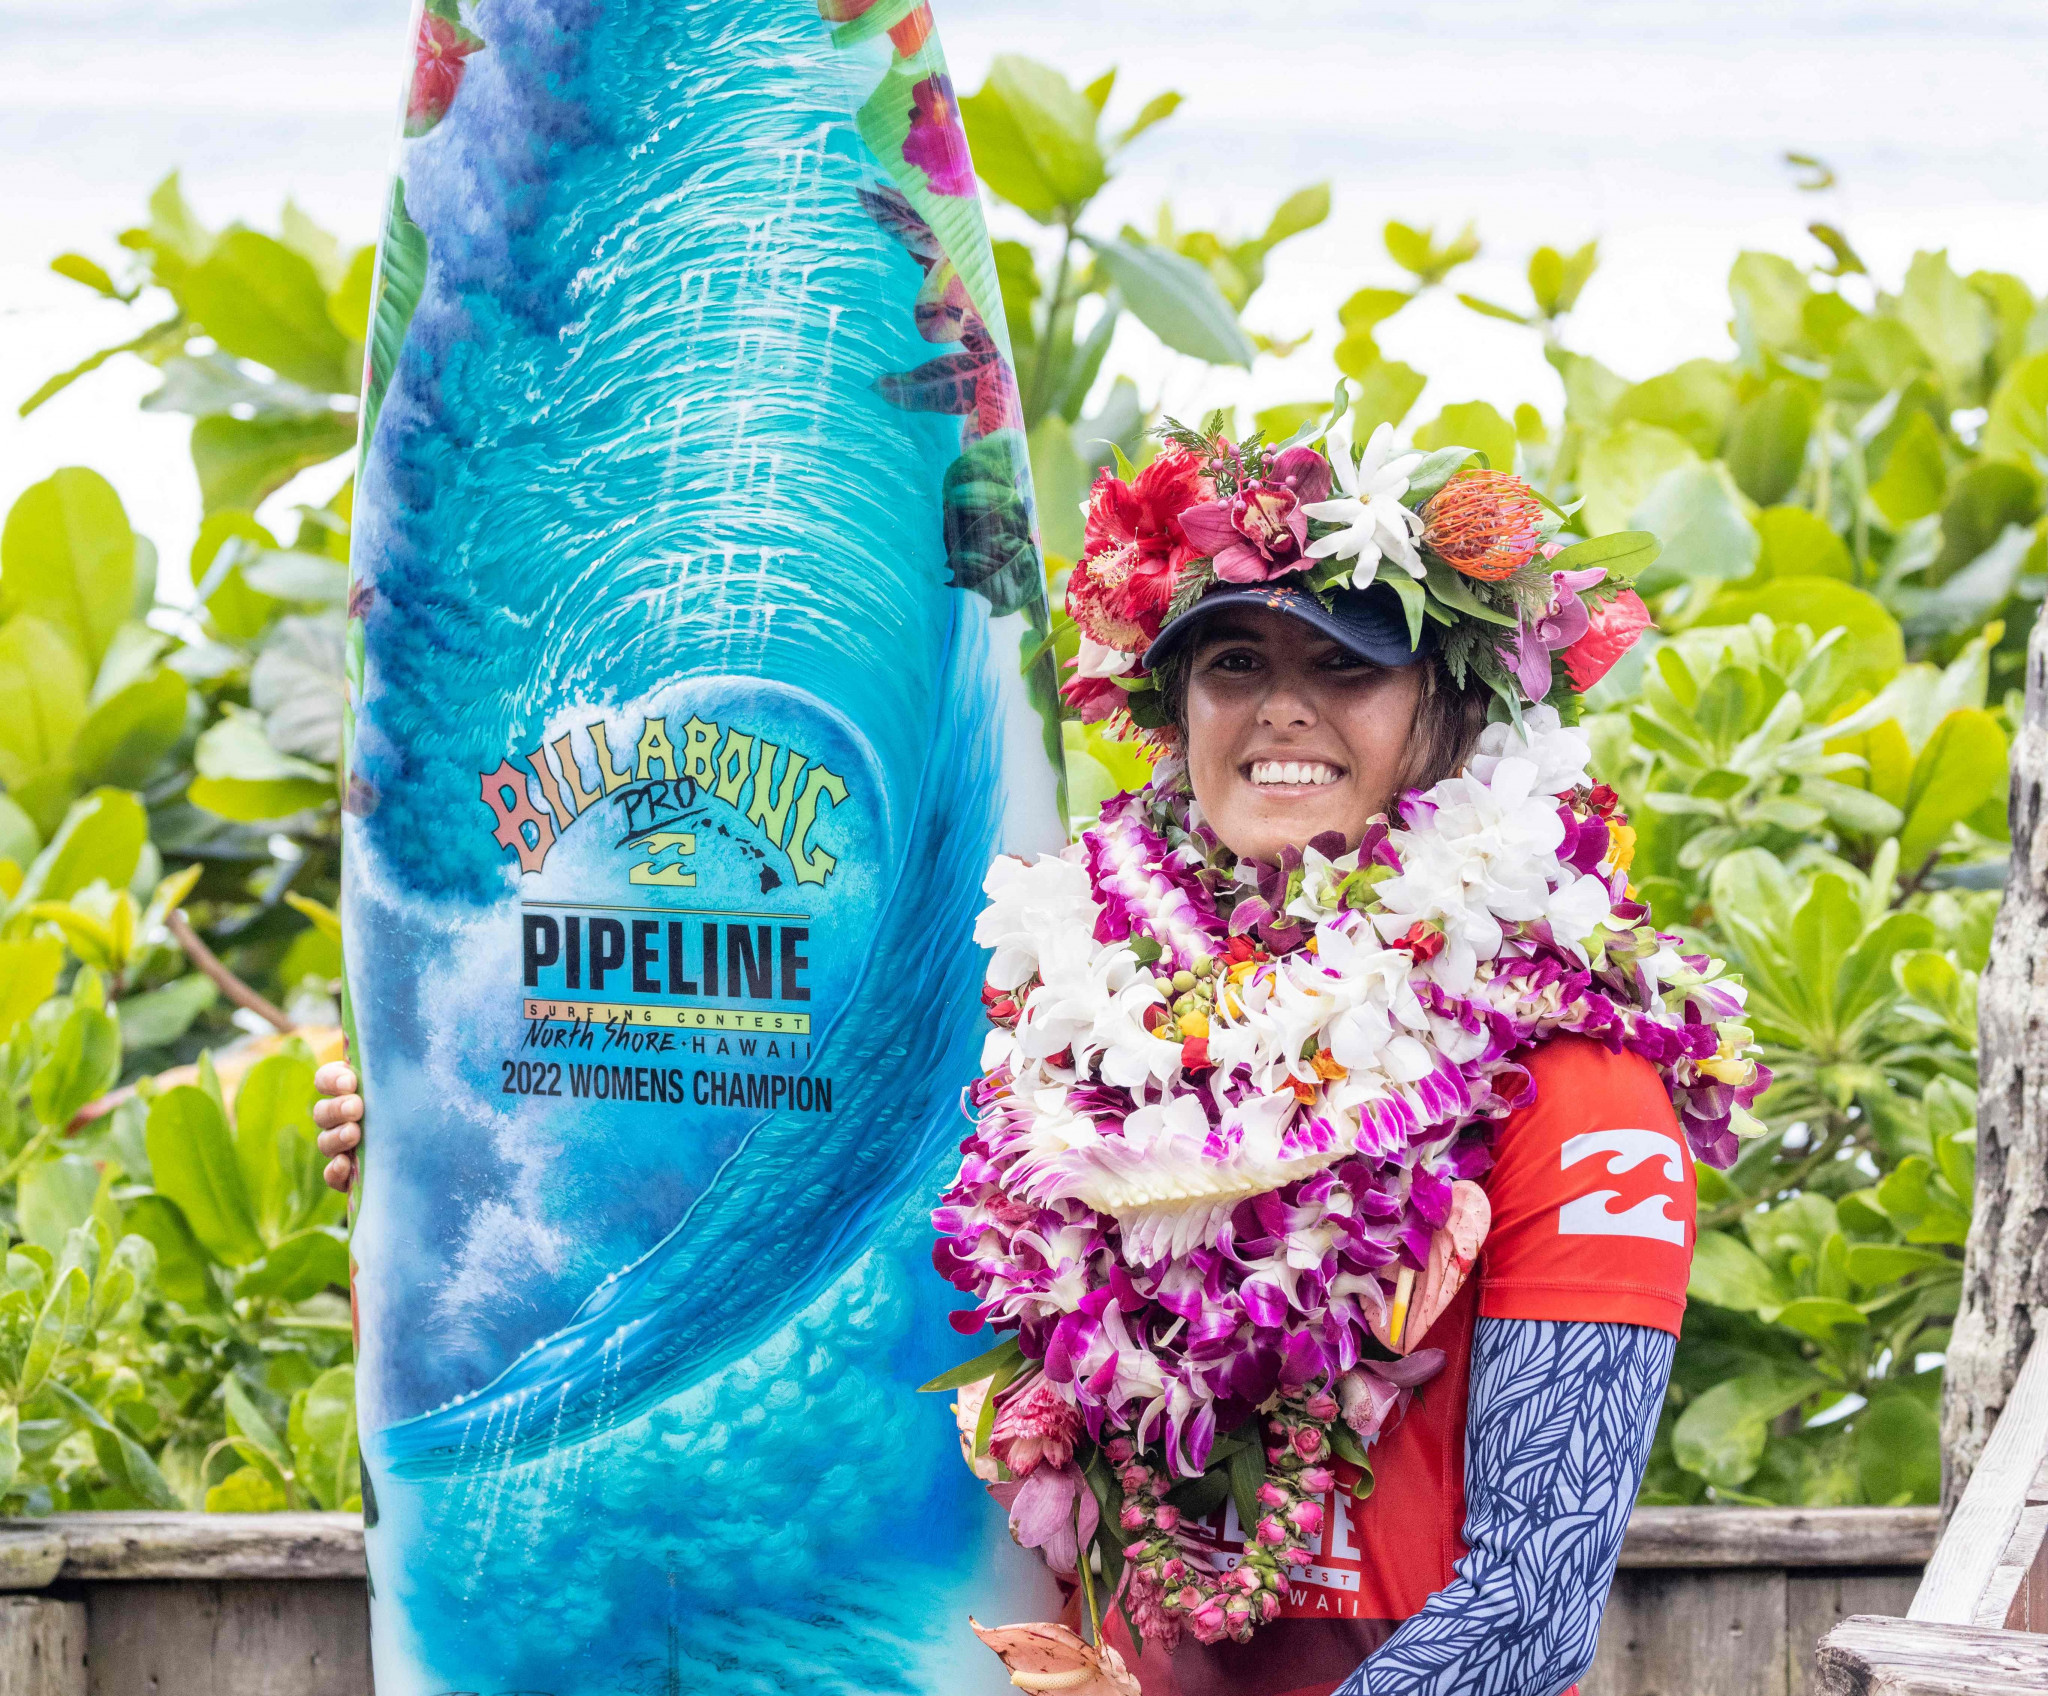 Moana Jones Wong is the first wildcard to win a WSL Championship Tour event since 2010 ©Getty Images